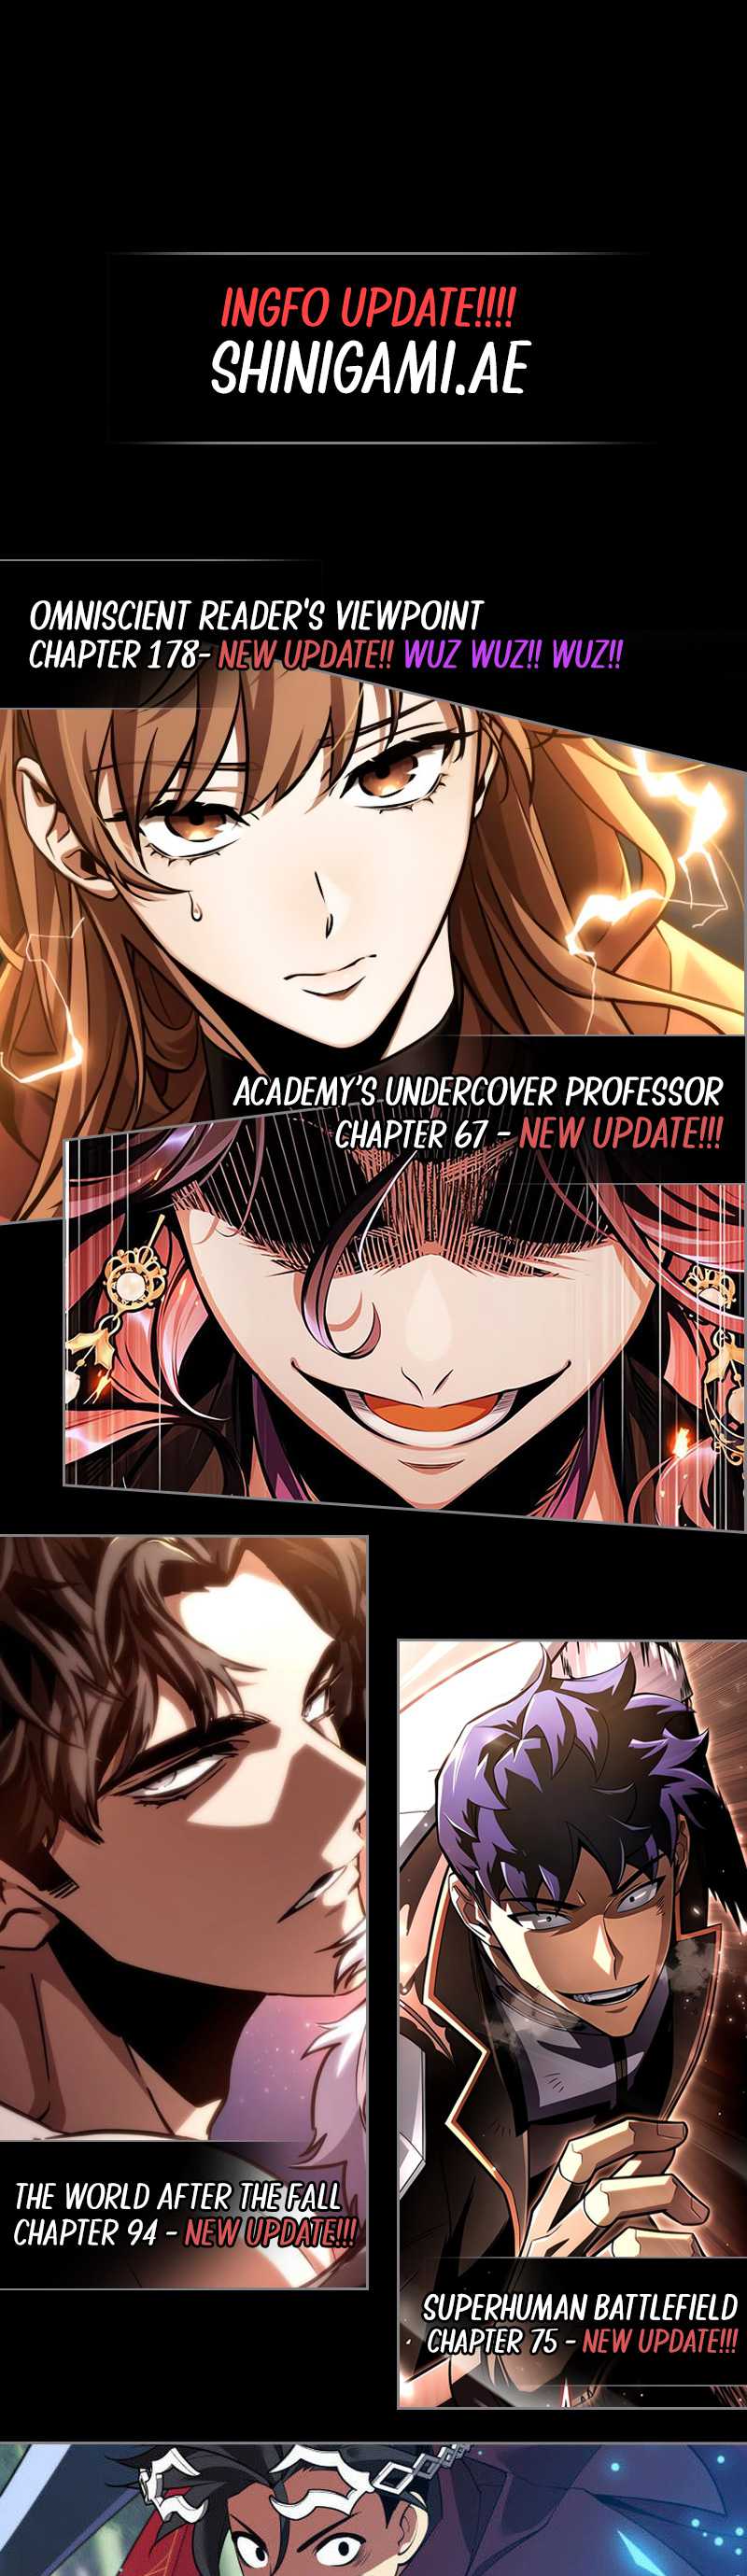 Archmage Streamer Chapter 83